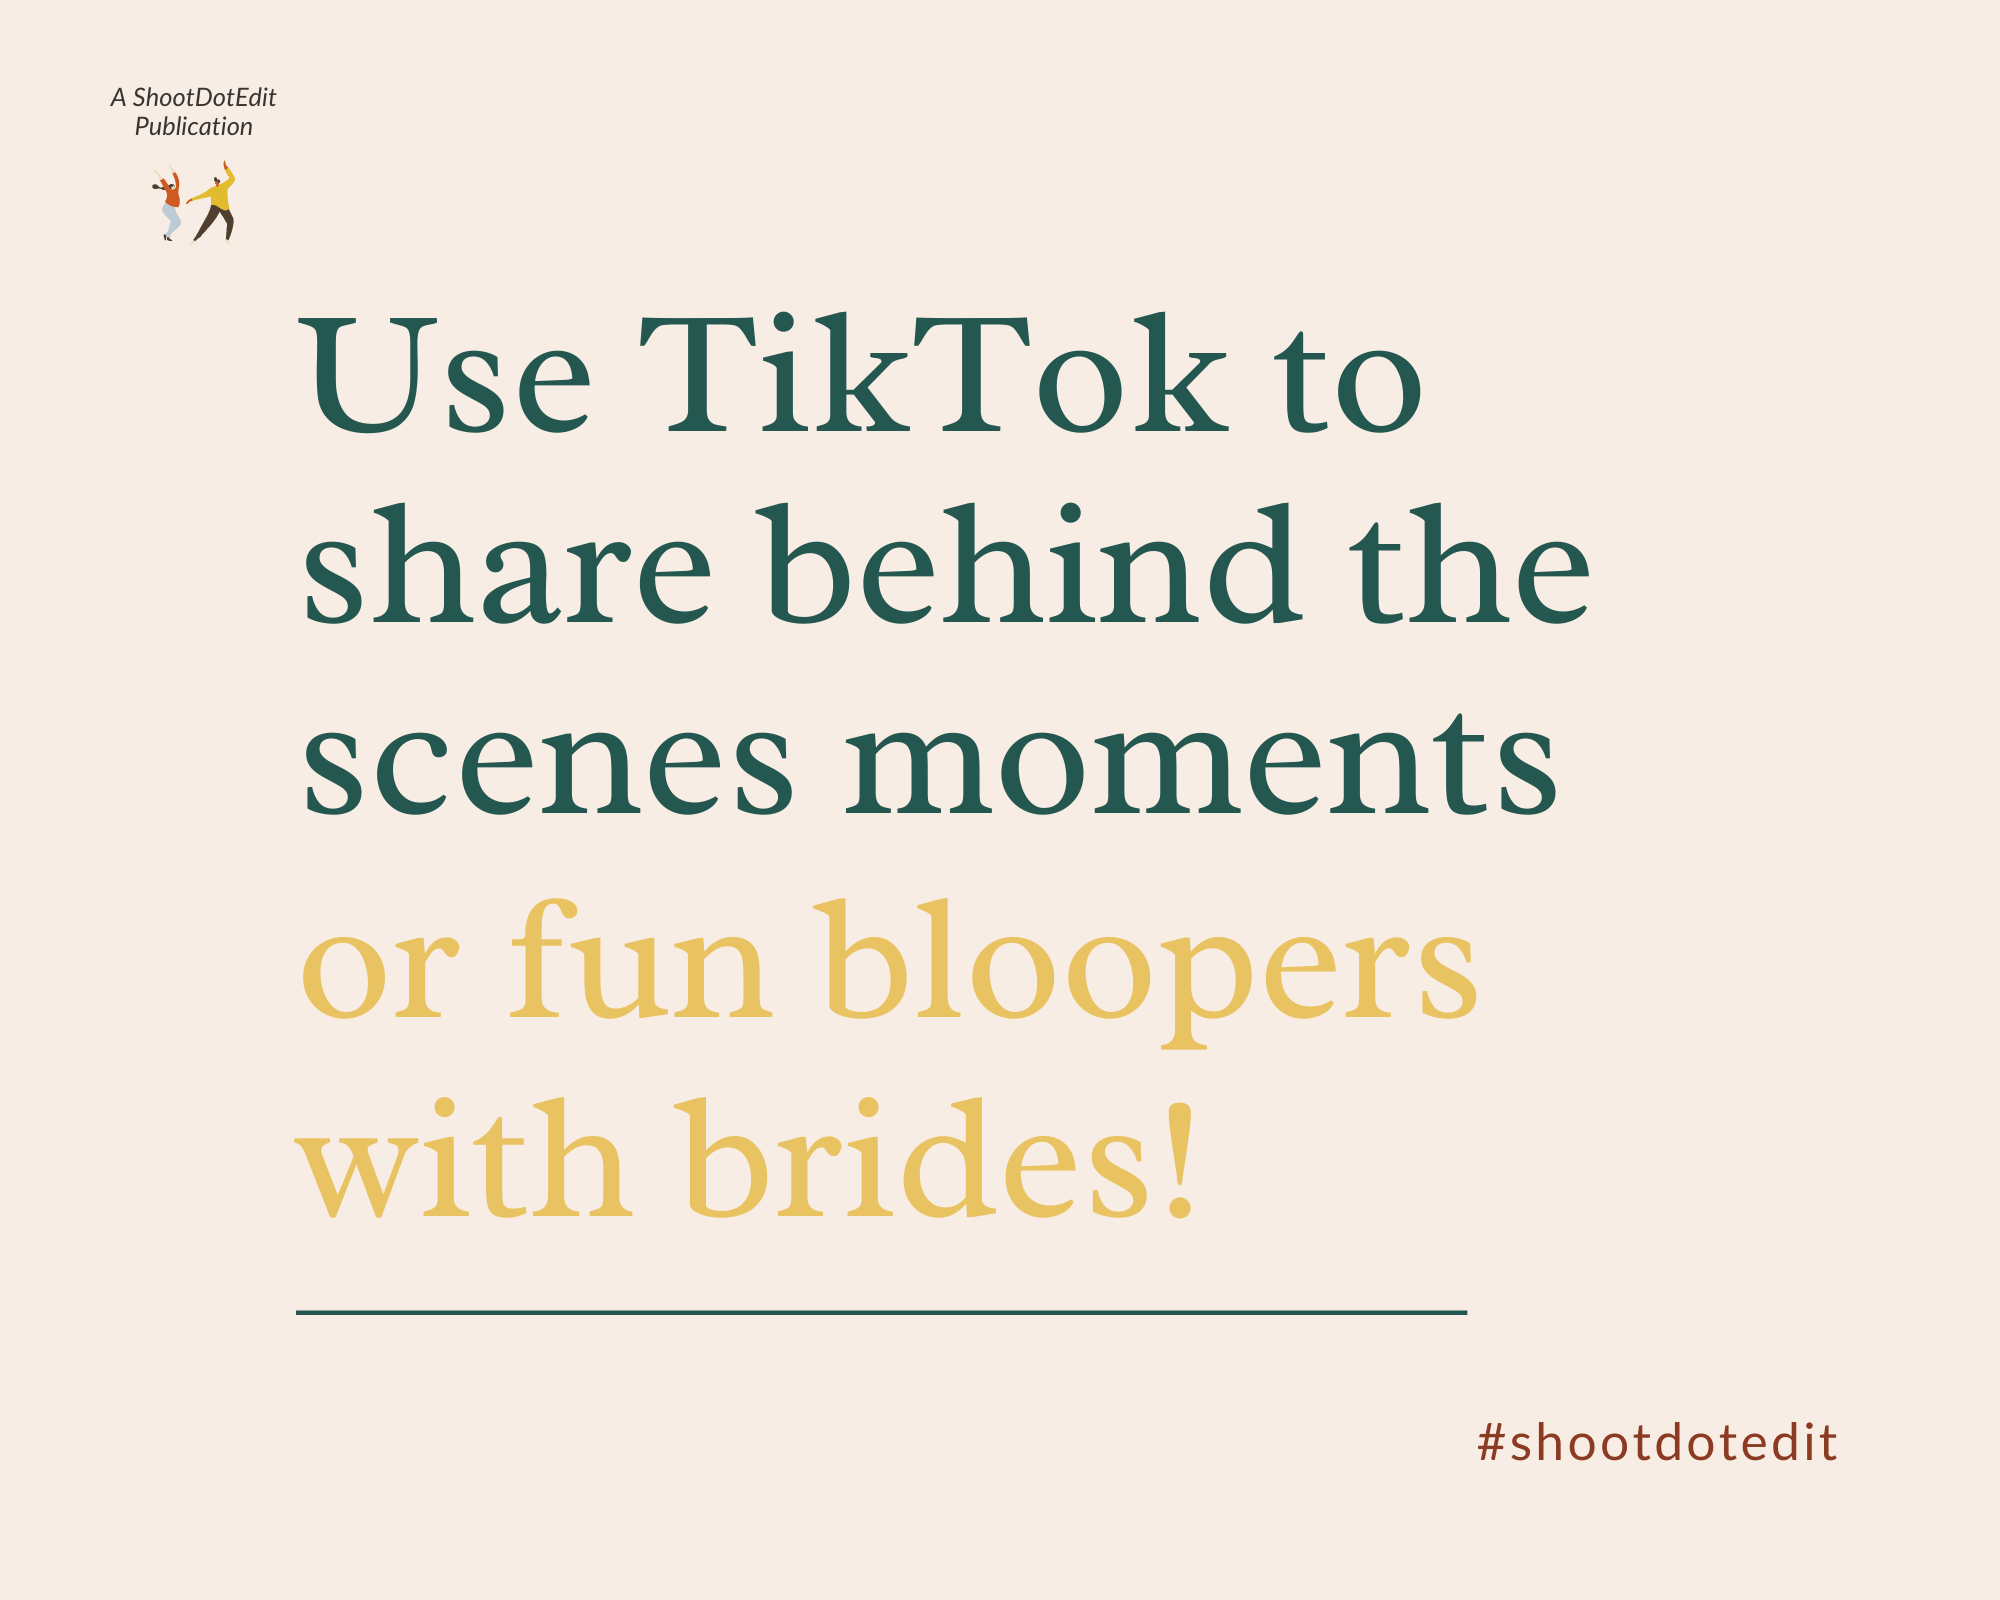 Infographic stating use TikTok to share behind the scenes moments of fun bloopers with brides